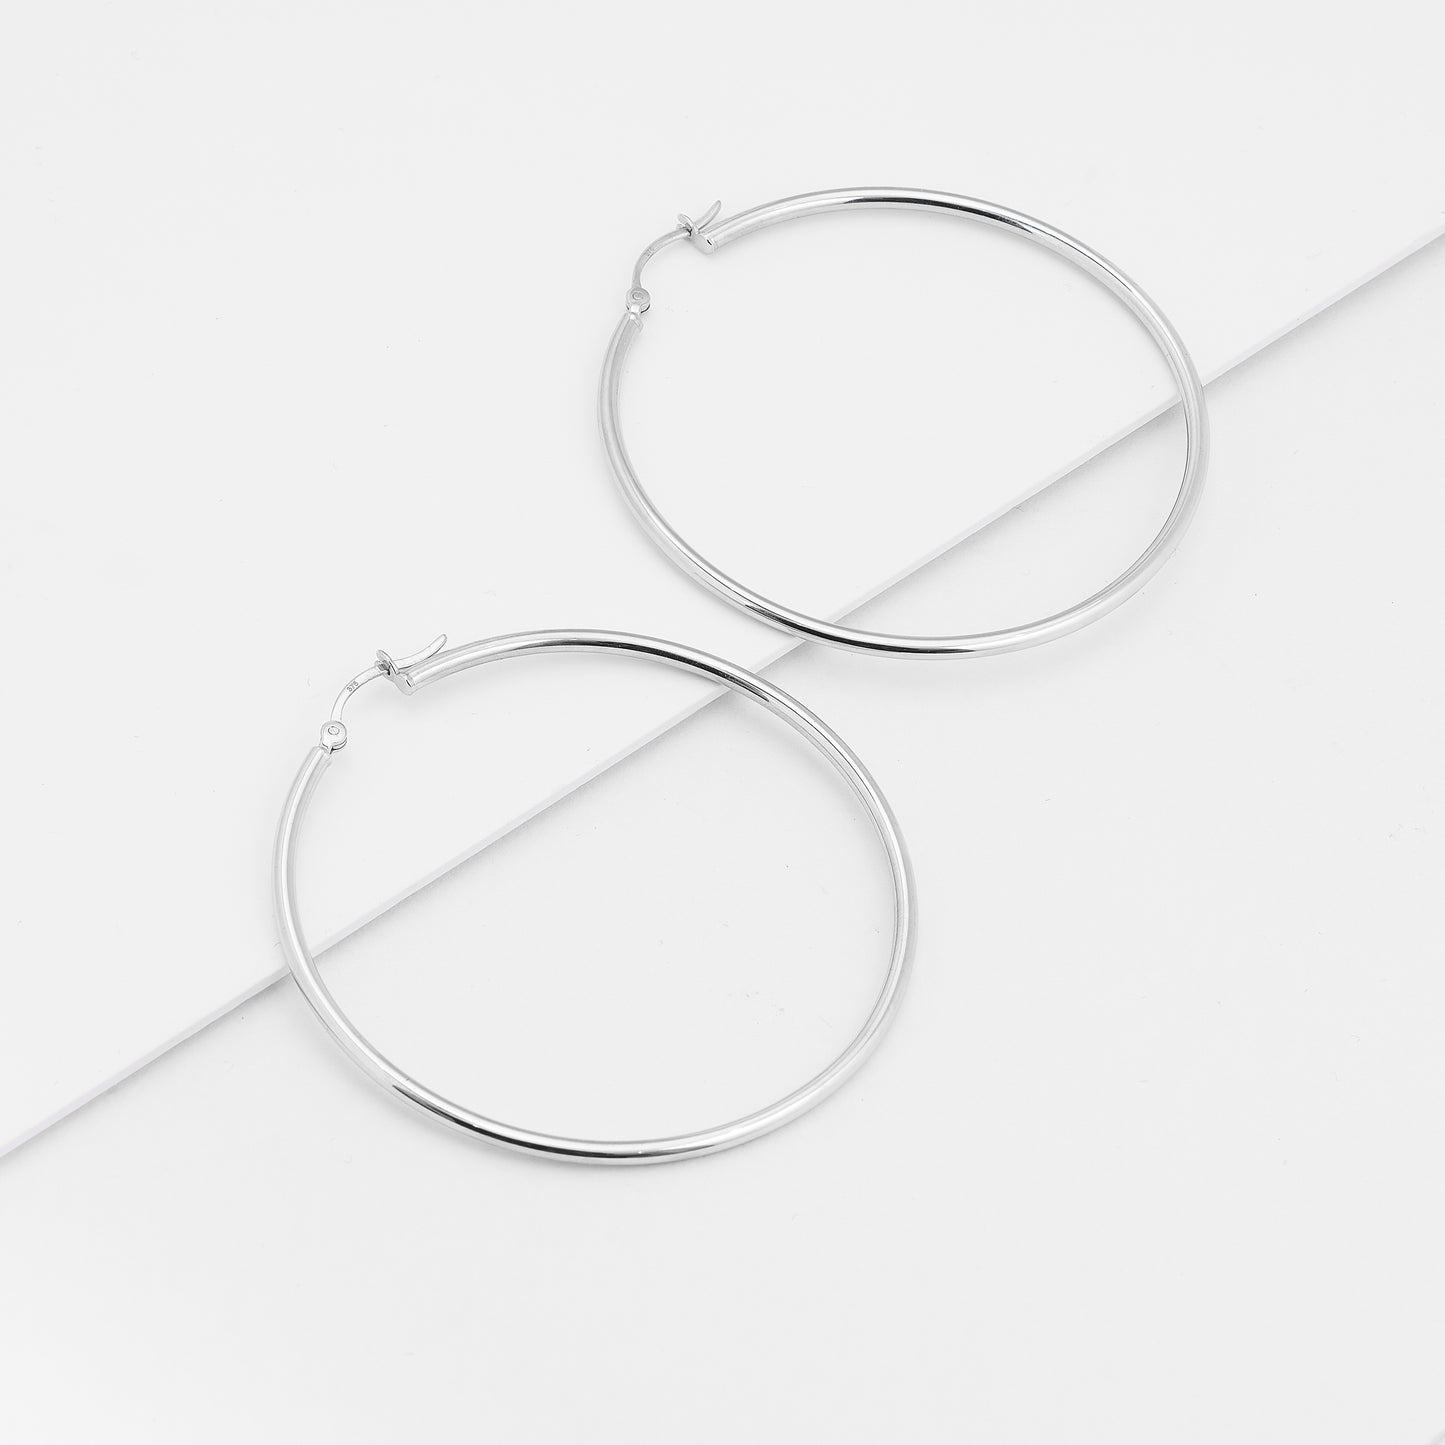 9K White Gold Polished Round Hoop Earrings 45mm